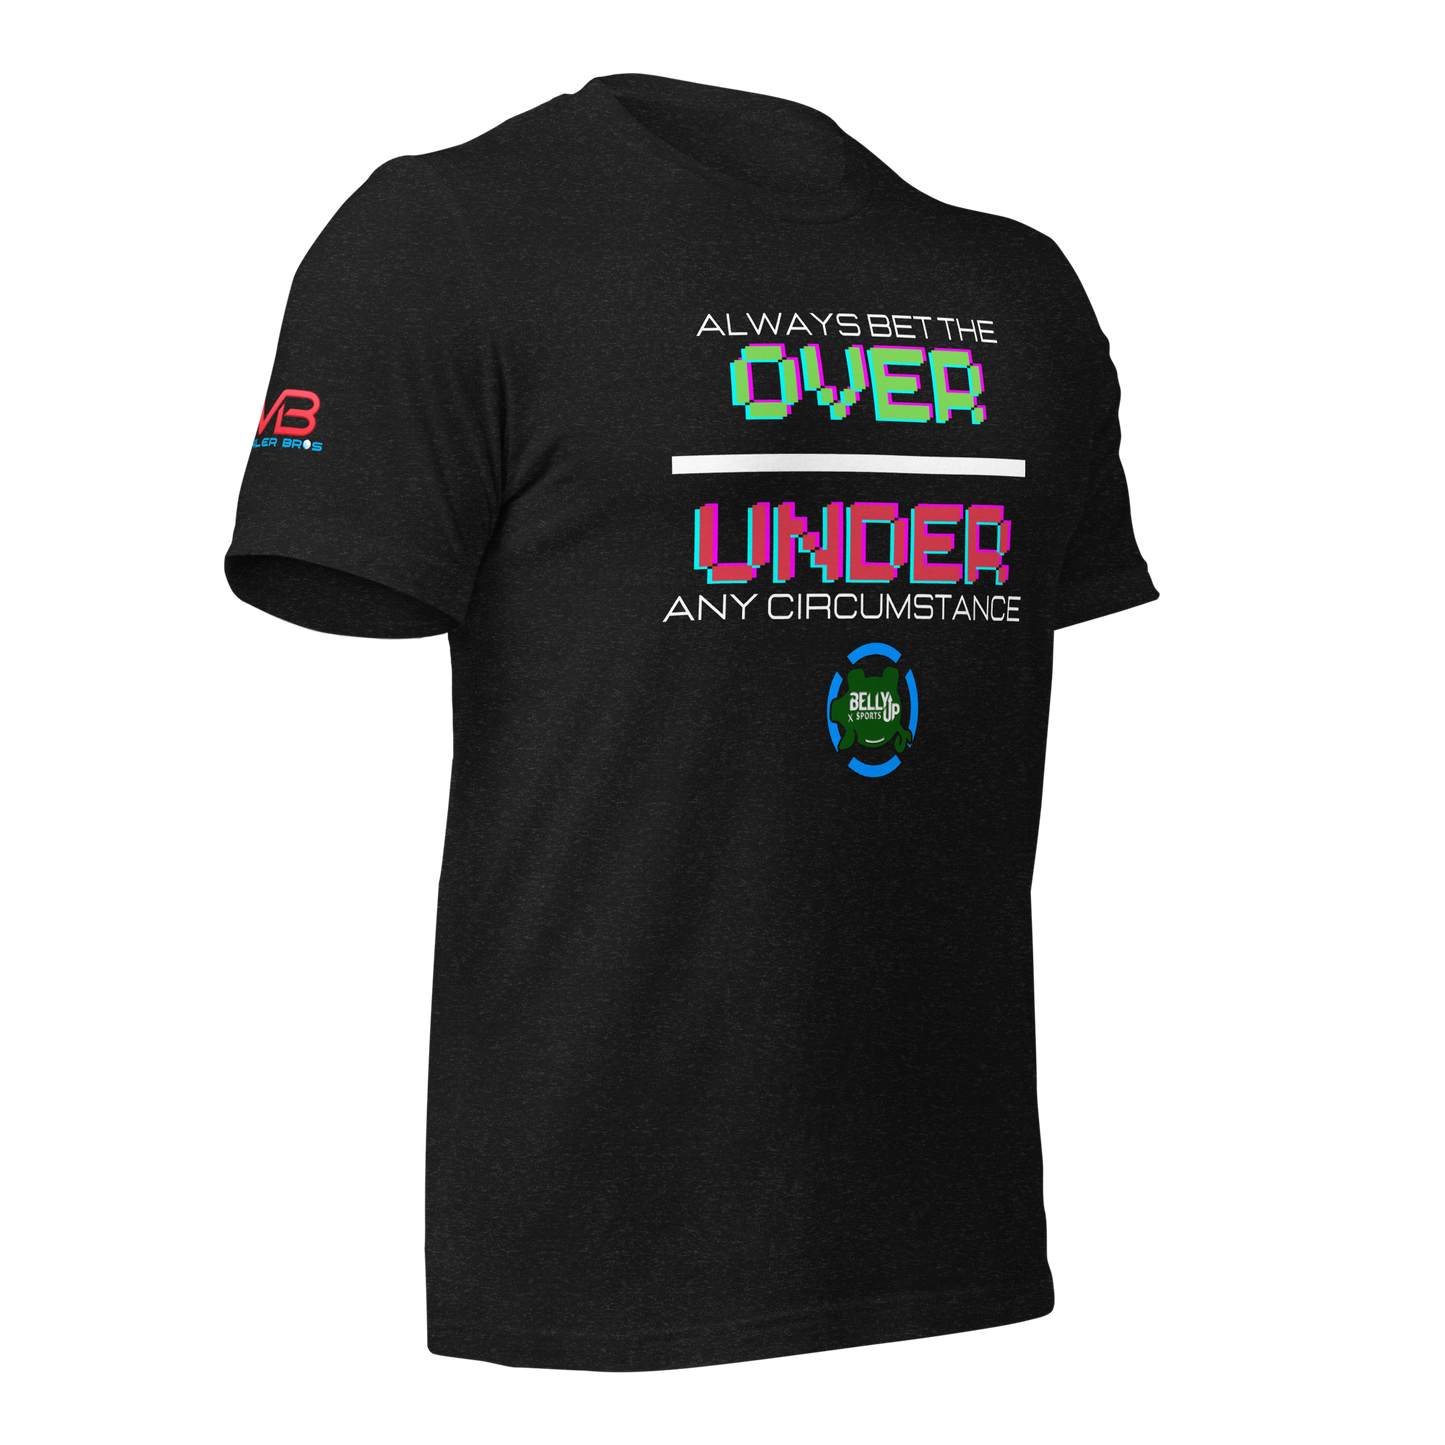 Over/Under Belly Up Tee Shirt